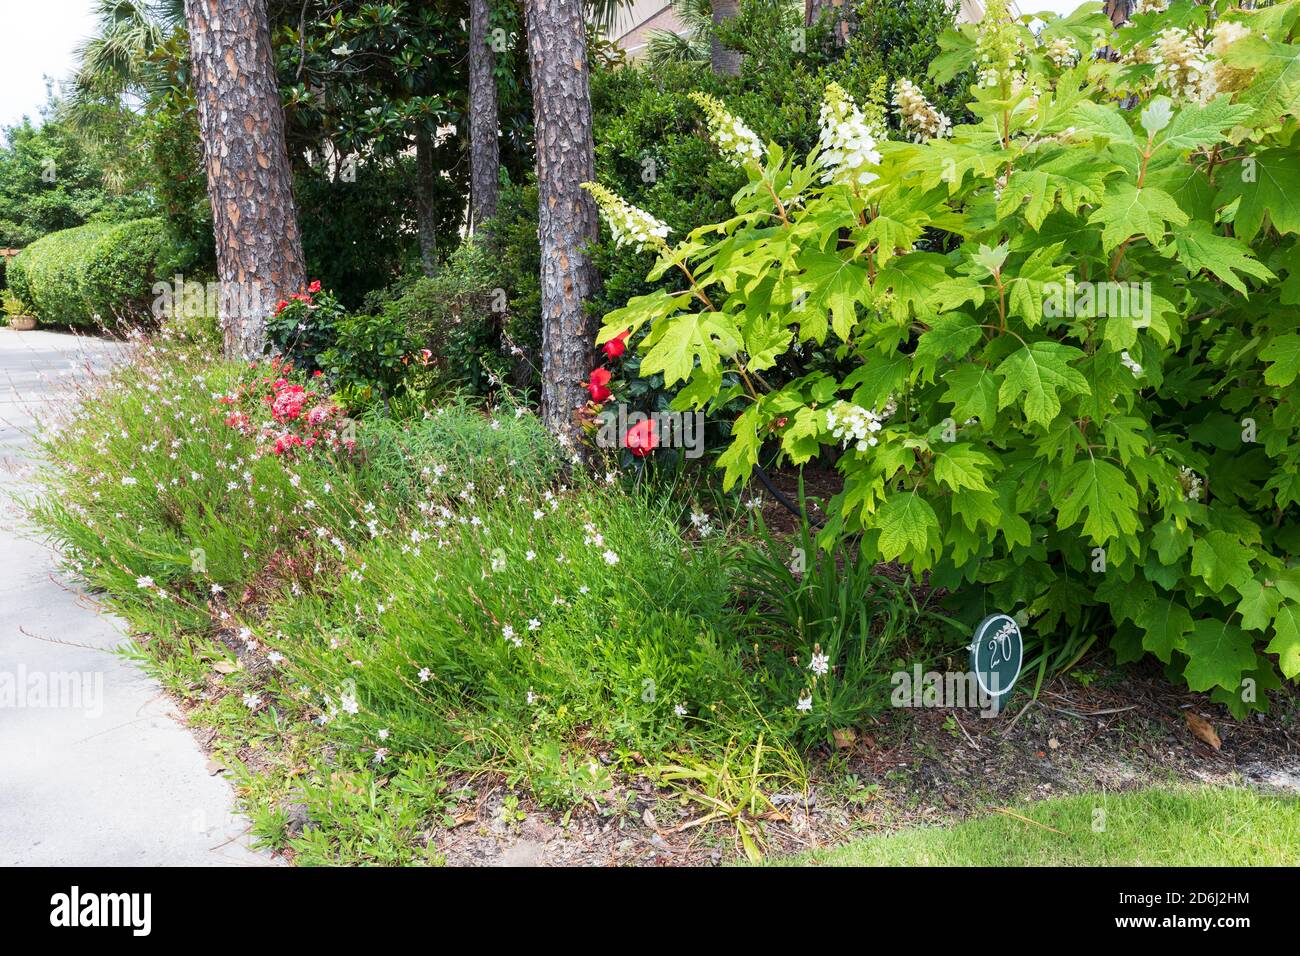 A South Carolina garden in May. Oak leaf hydrangea, gaura, drift roses and hibiscus in a colourful border at the edge of the drive. Stock Photo